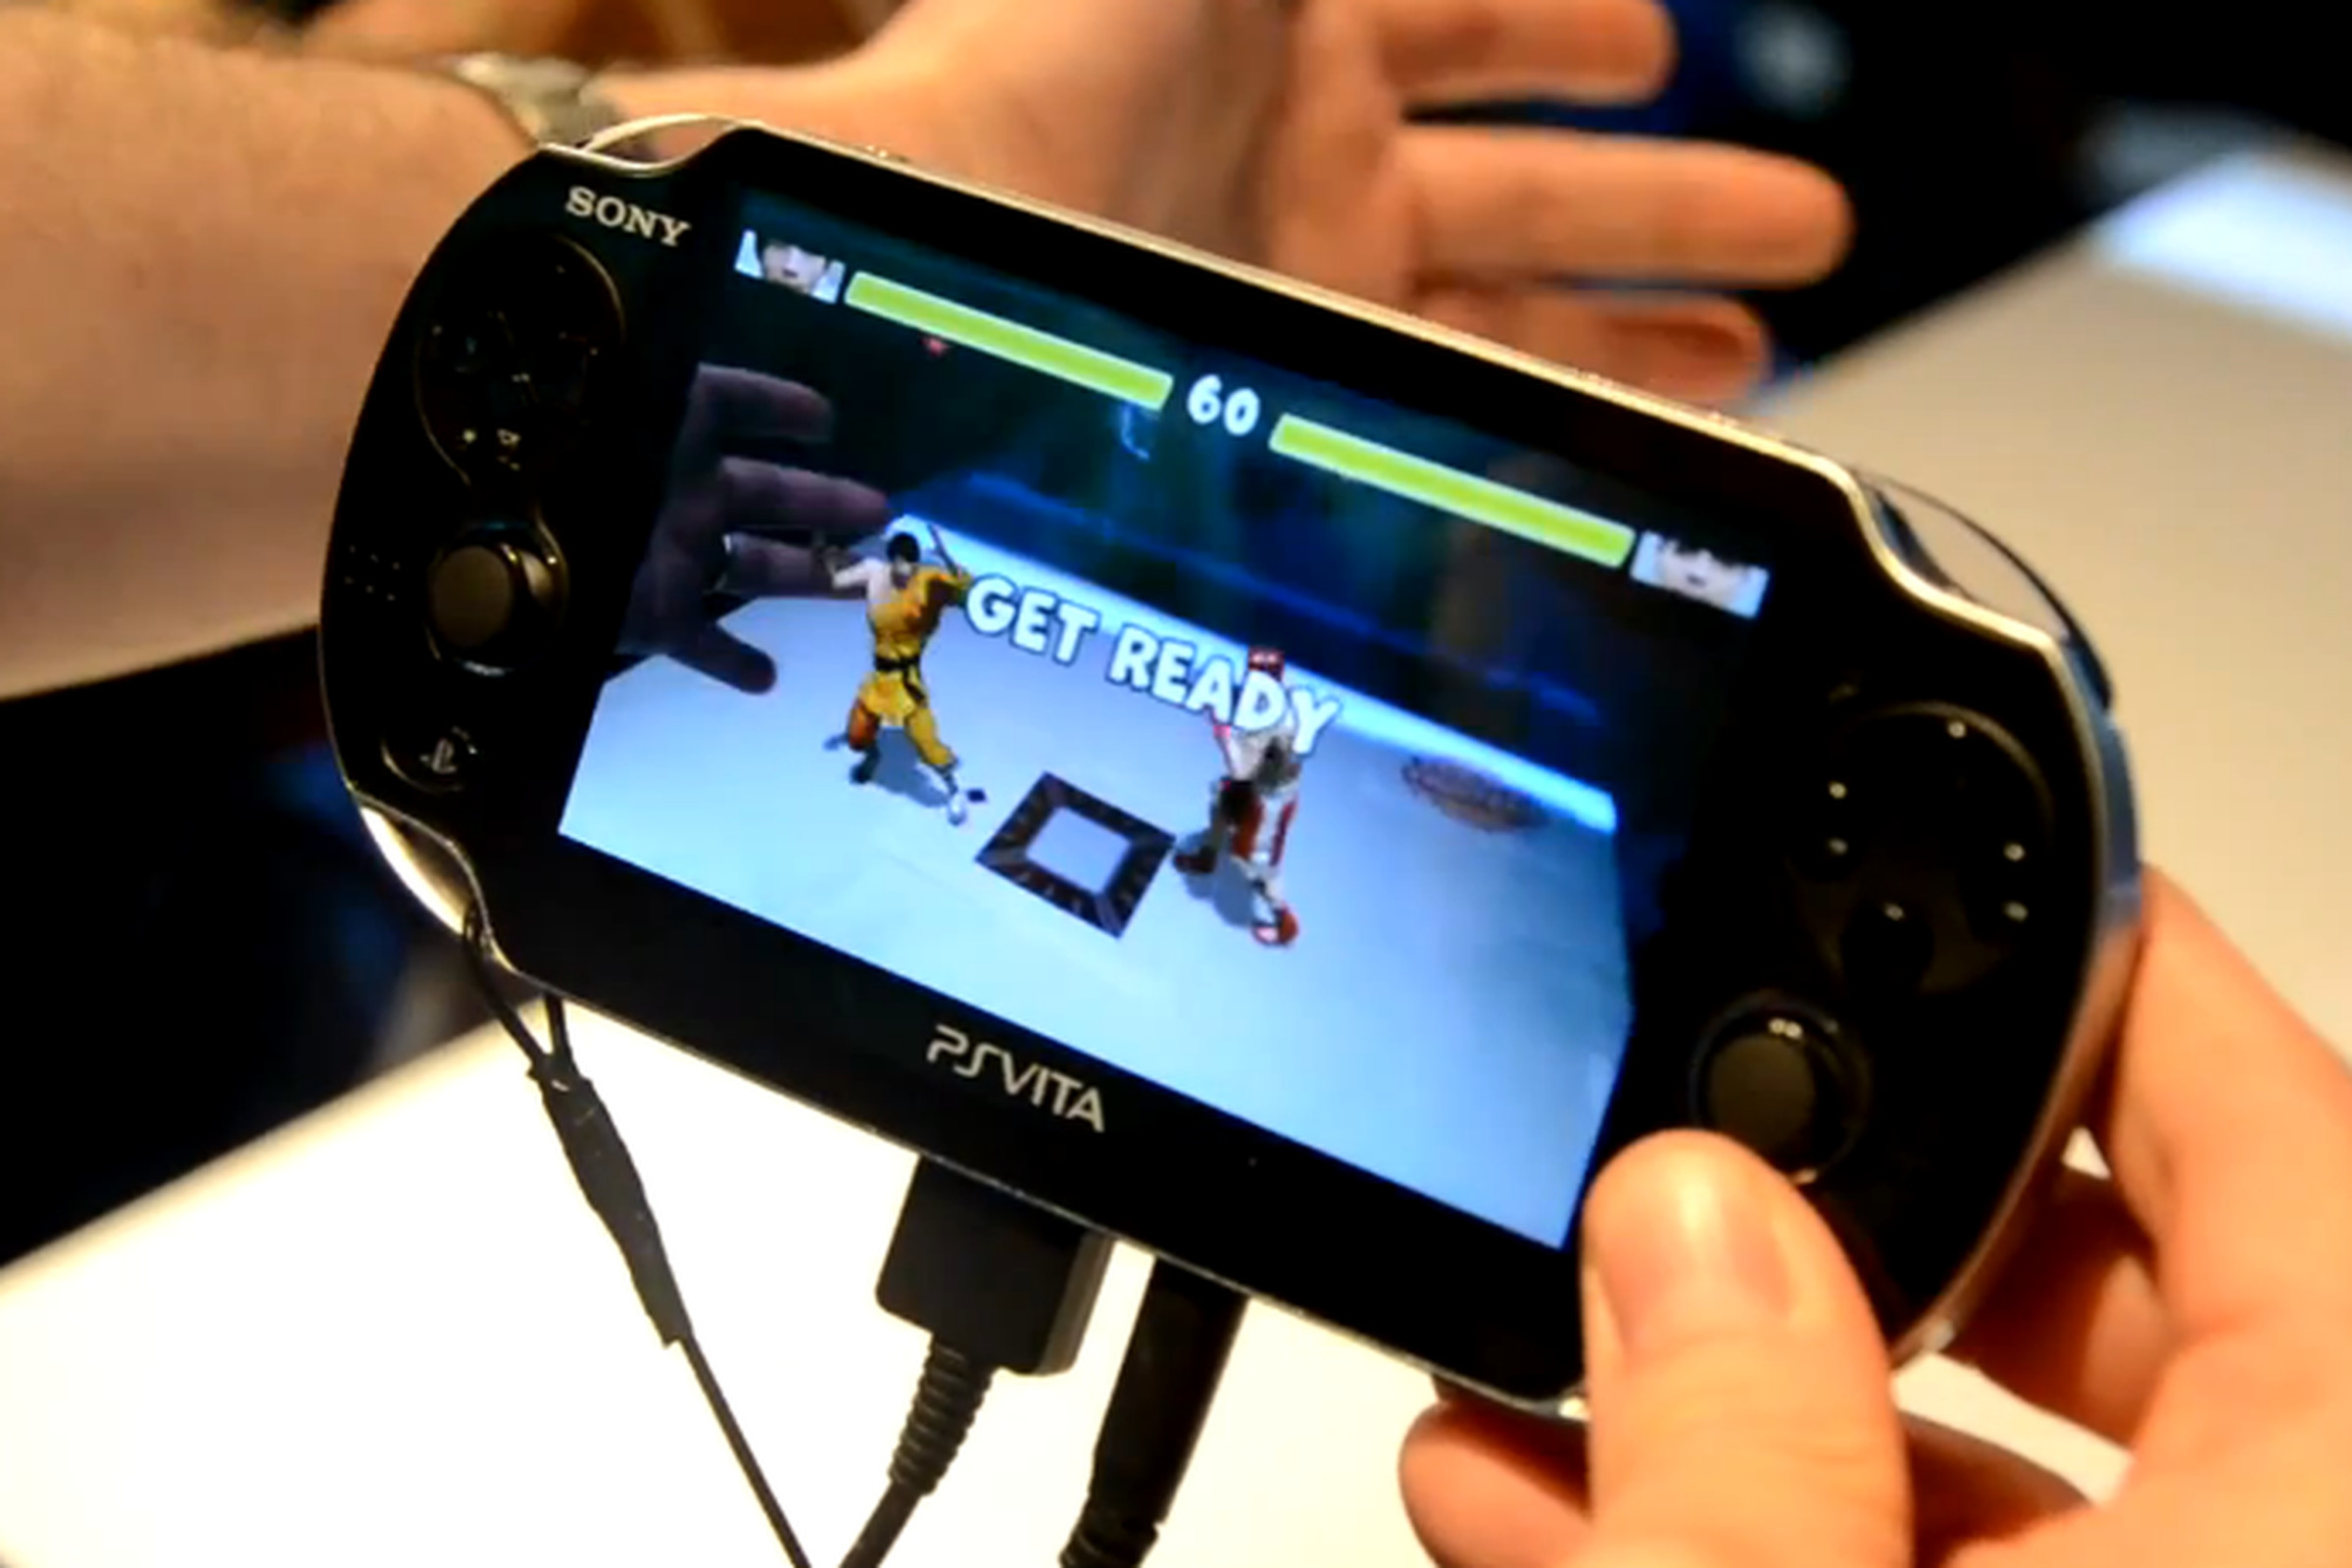 Reality Fighters on PlayStation Vita at E3 2011